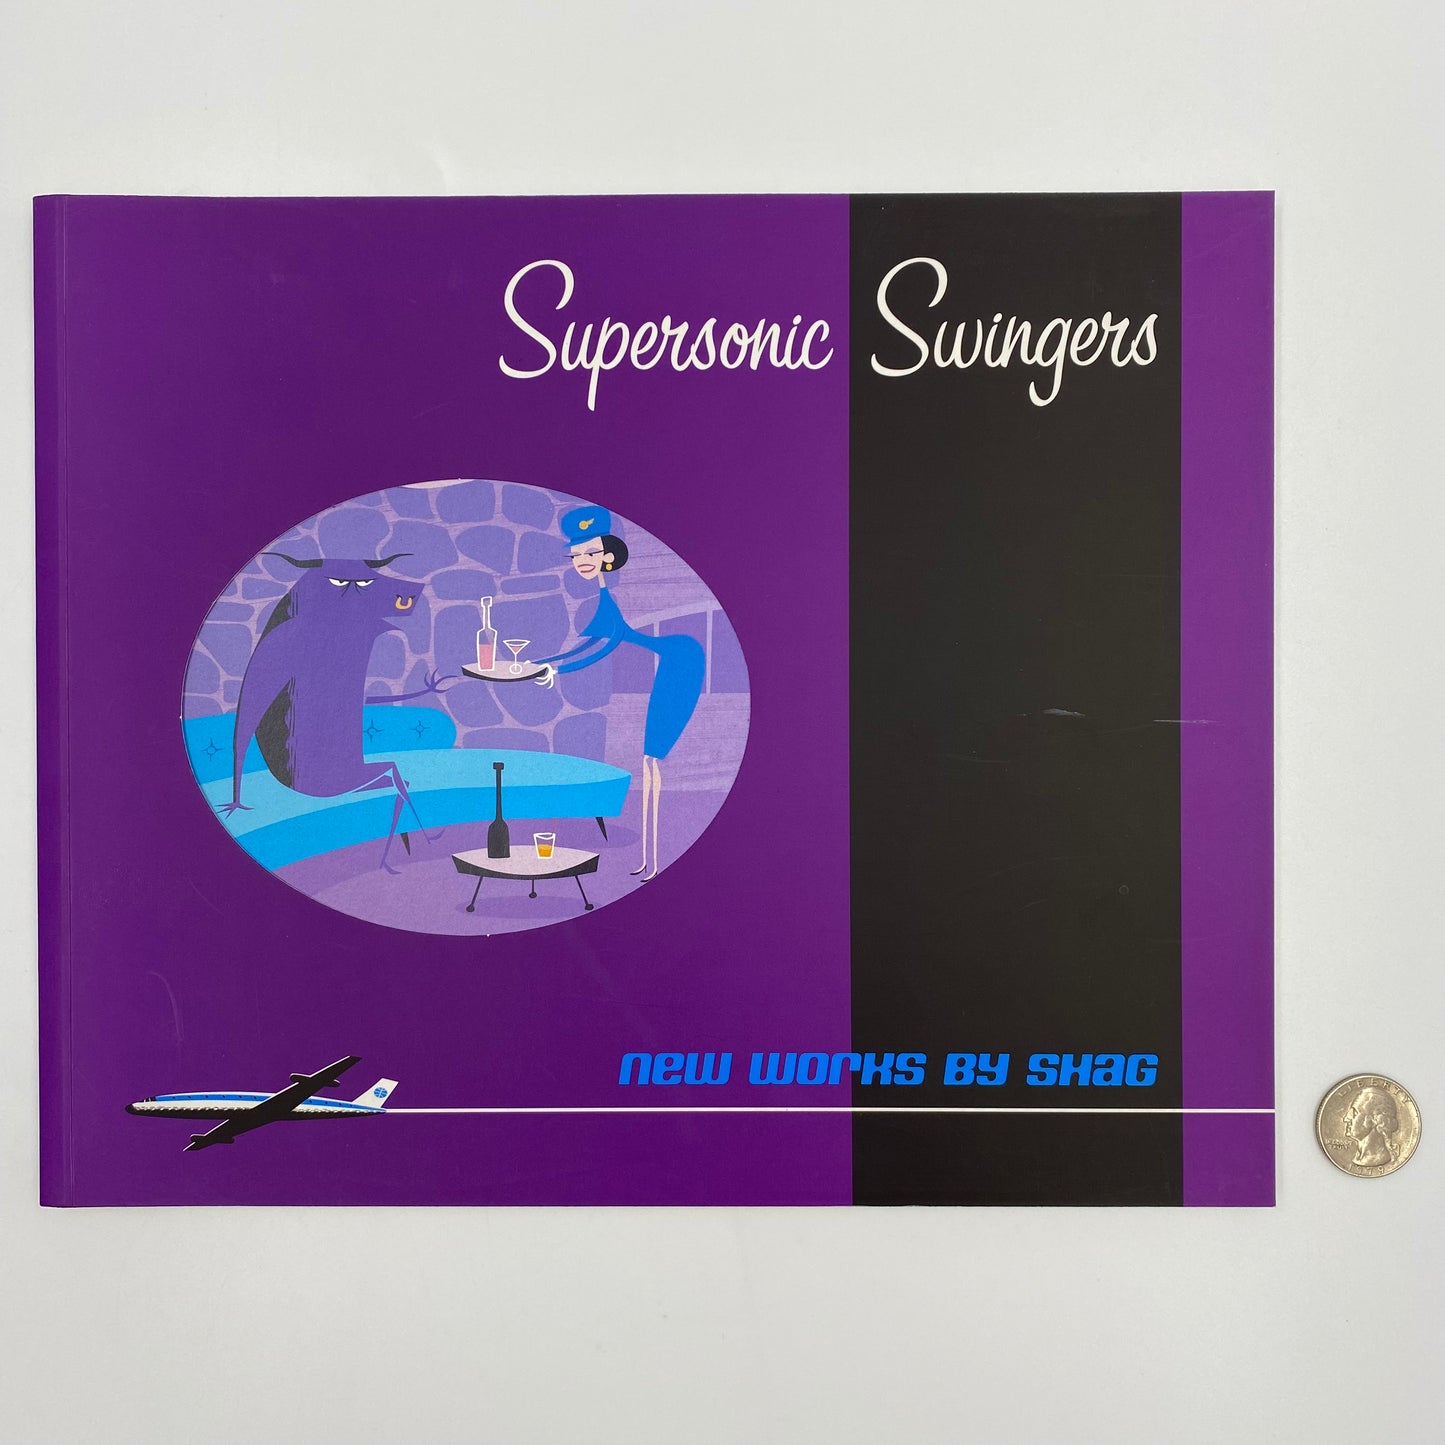 Shag: Supersonic Swingers, New Works by Shag second edition softcover (2001) Outré Gallery Press